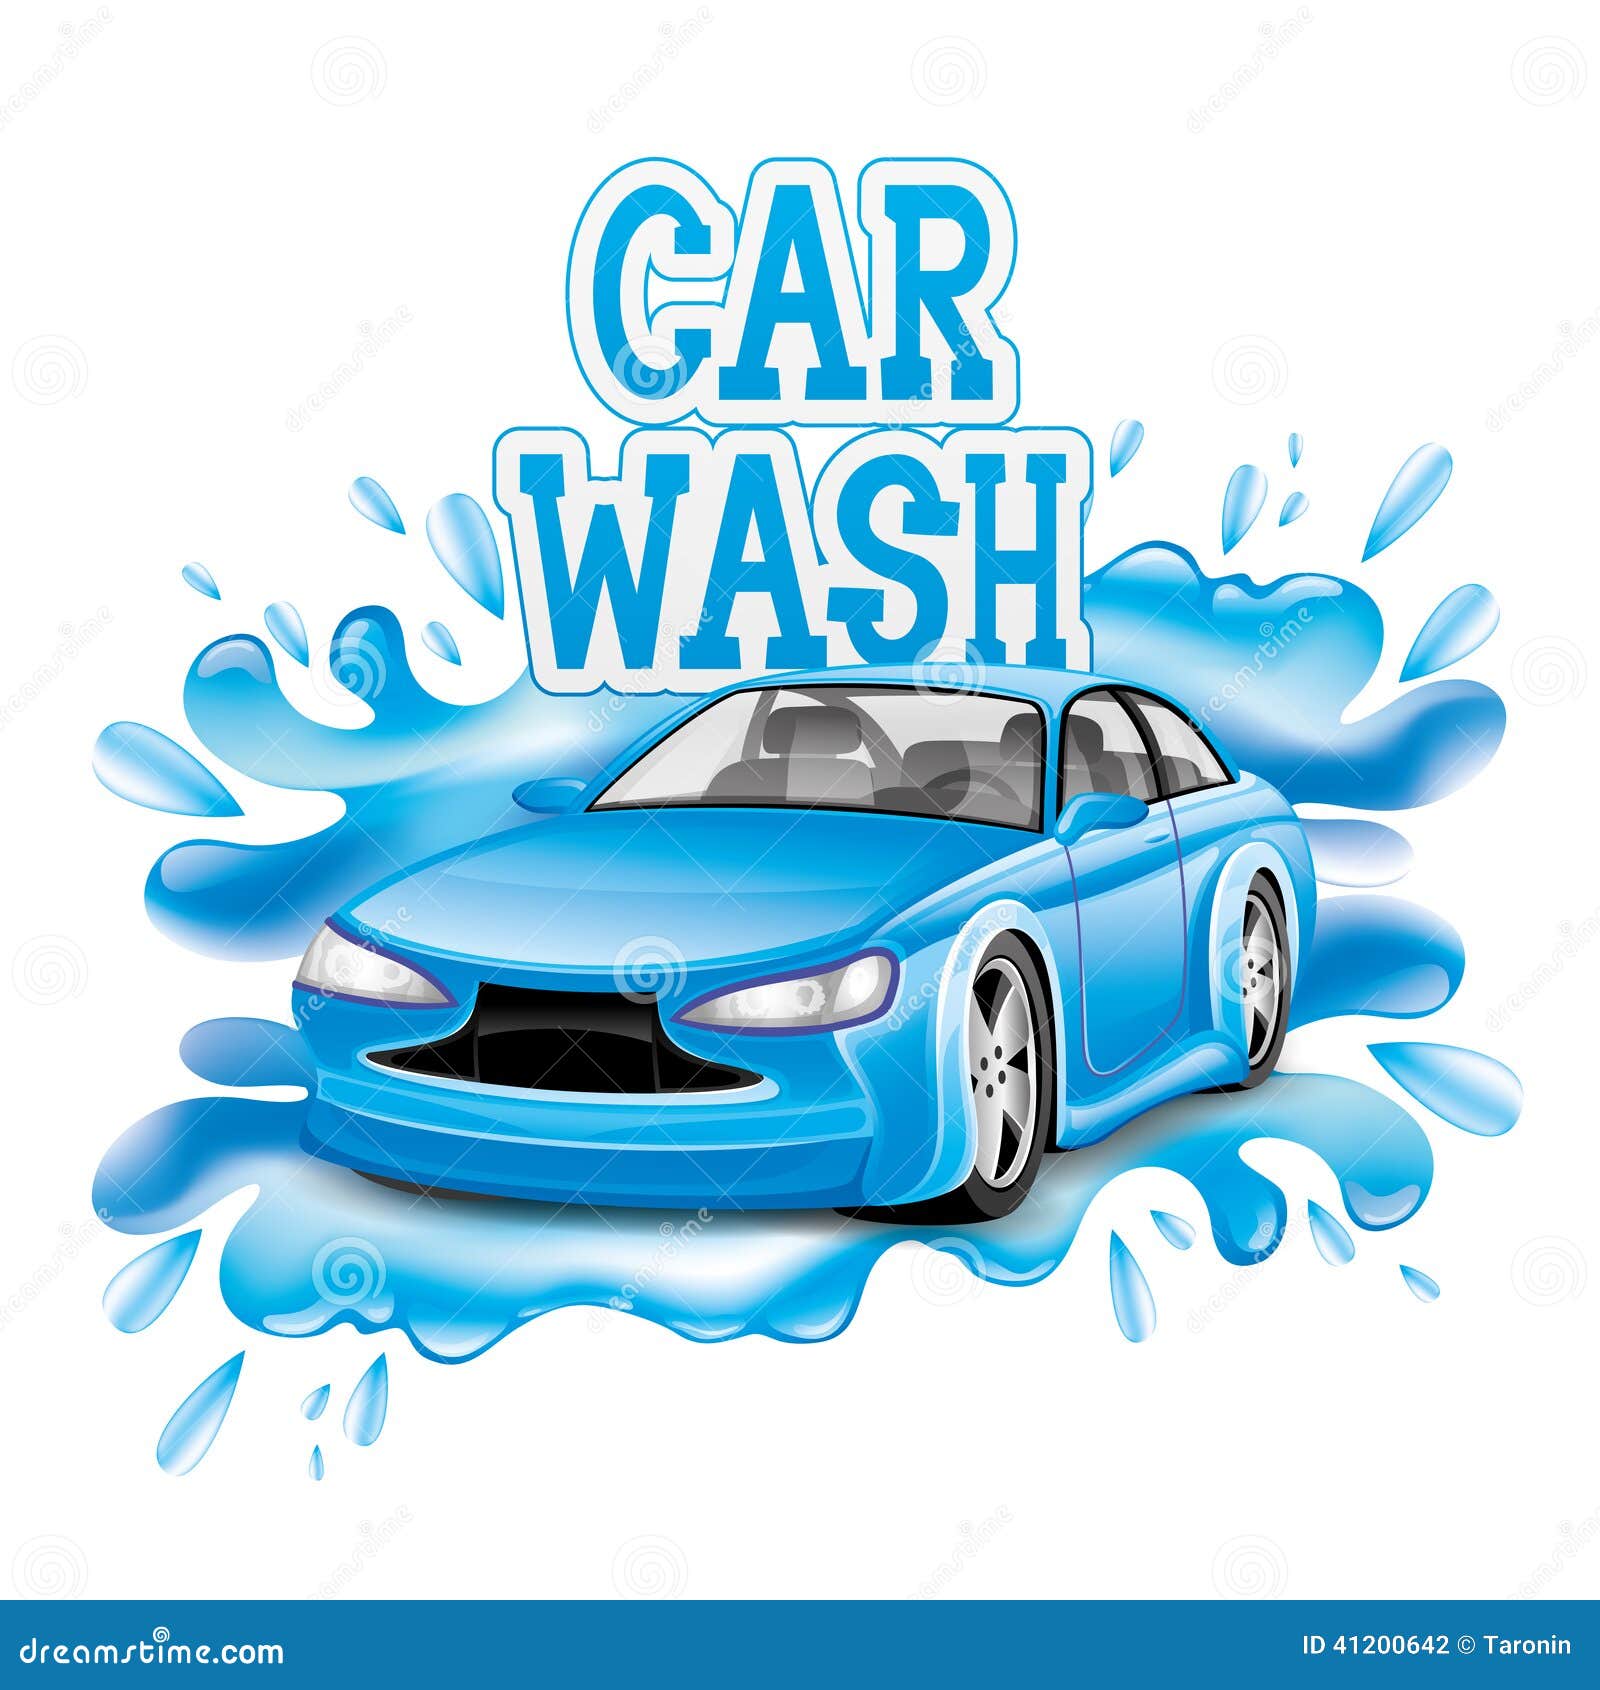 clipart for car wash - photo #34